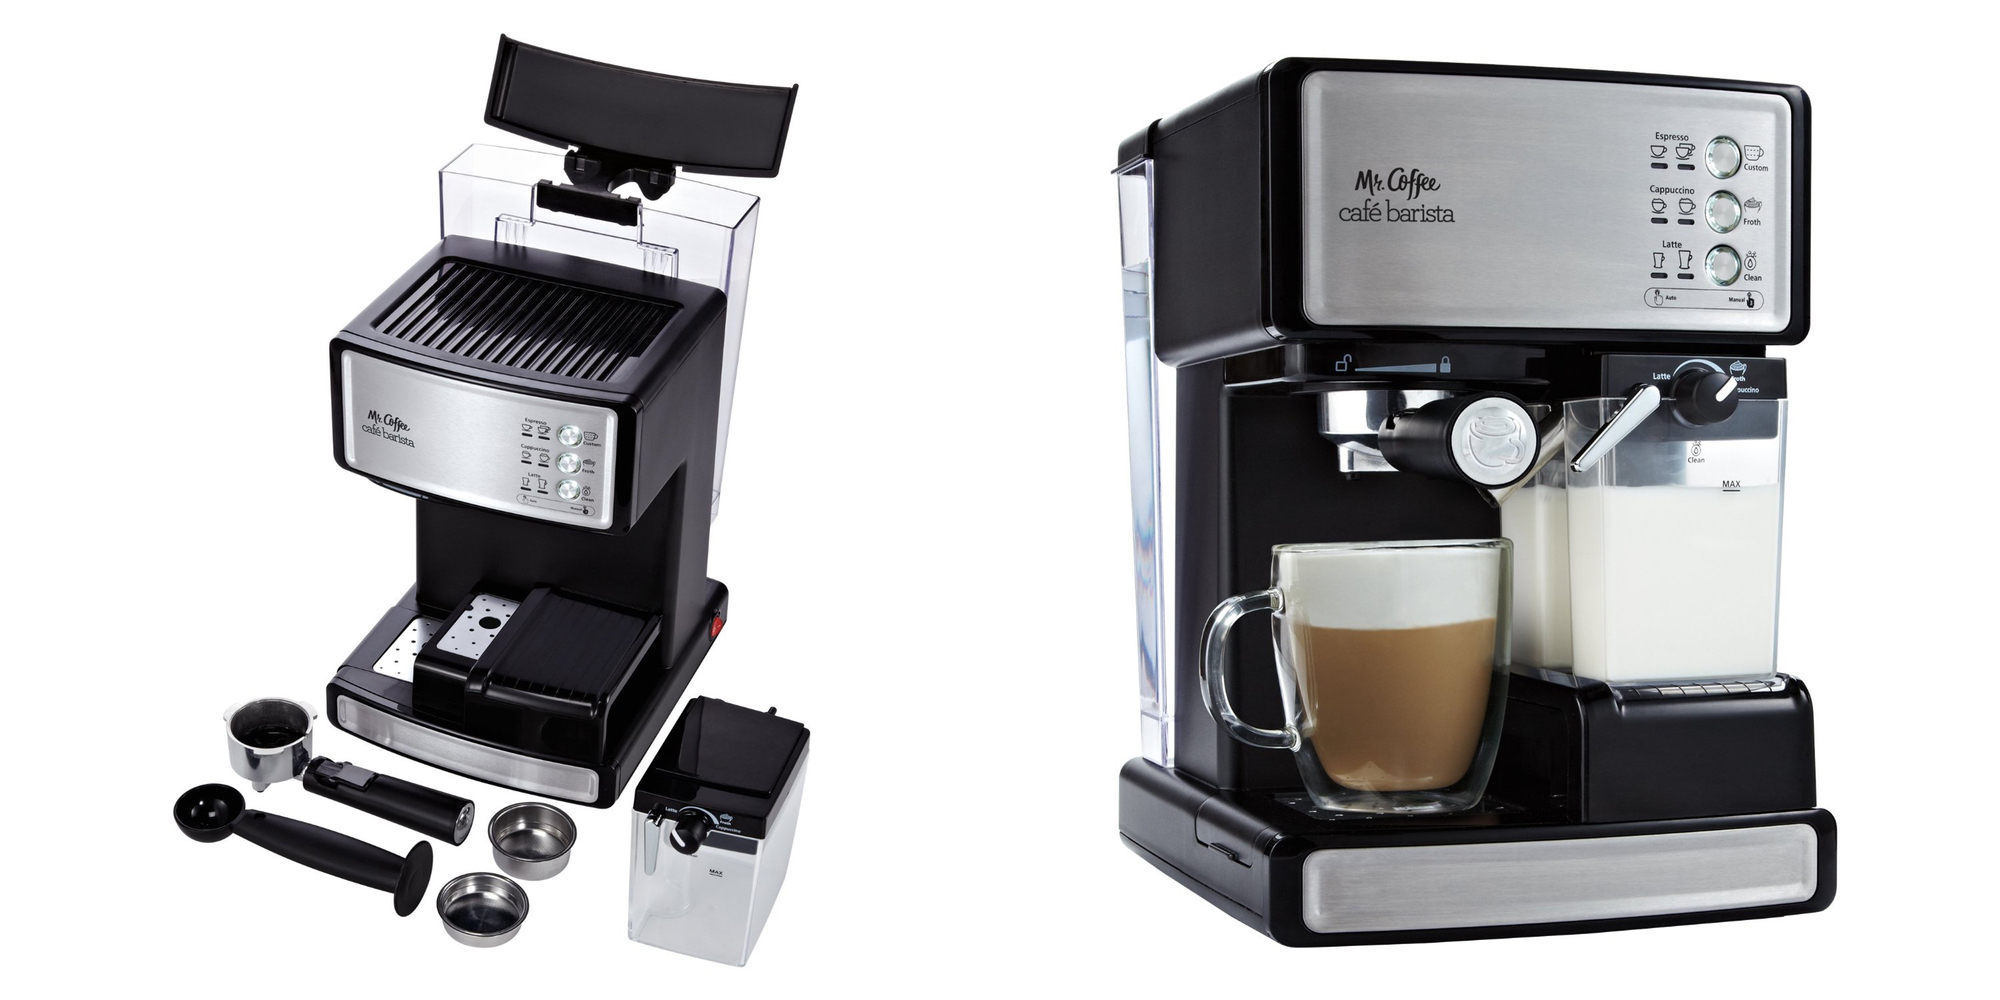 https://9to5toys.com/wp-content/uploads/sites/5/2017/08/mr-coffee-barista-system.jpg